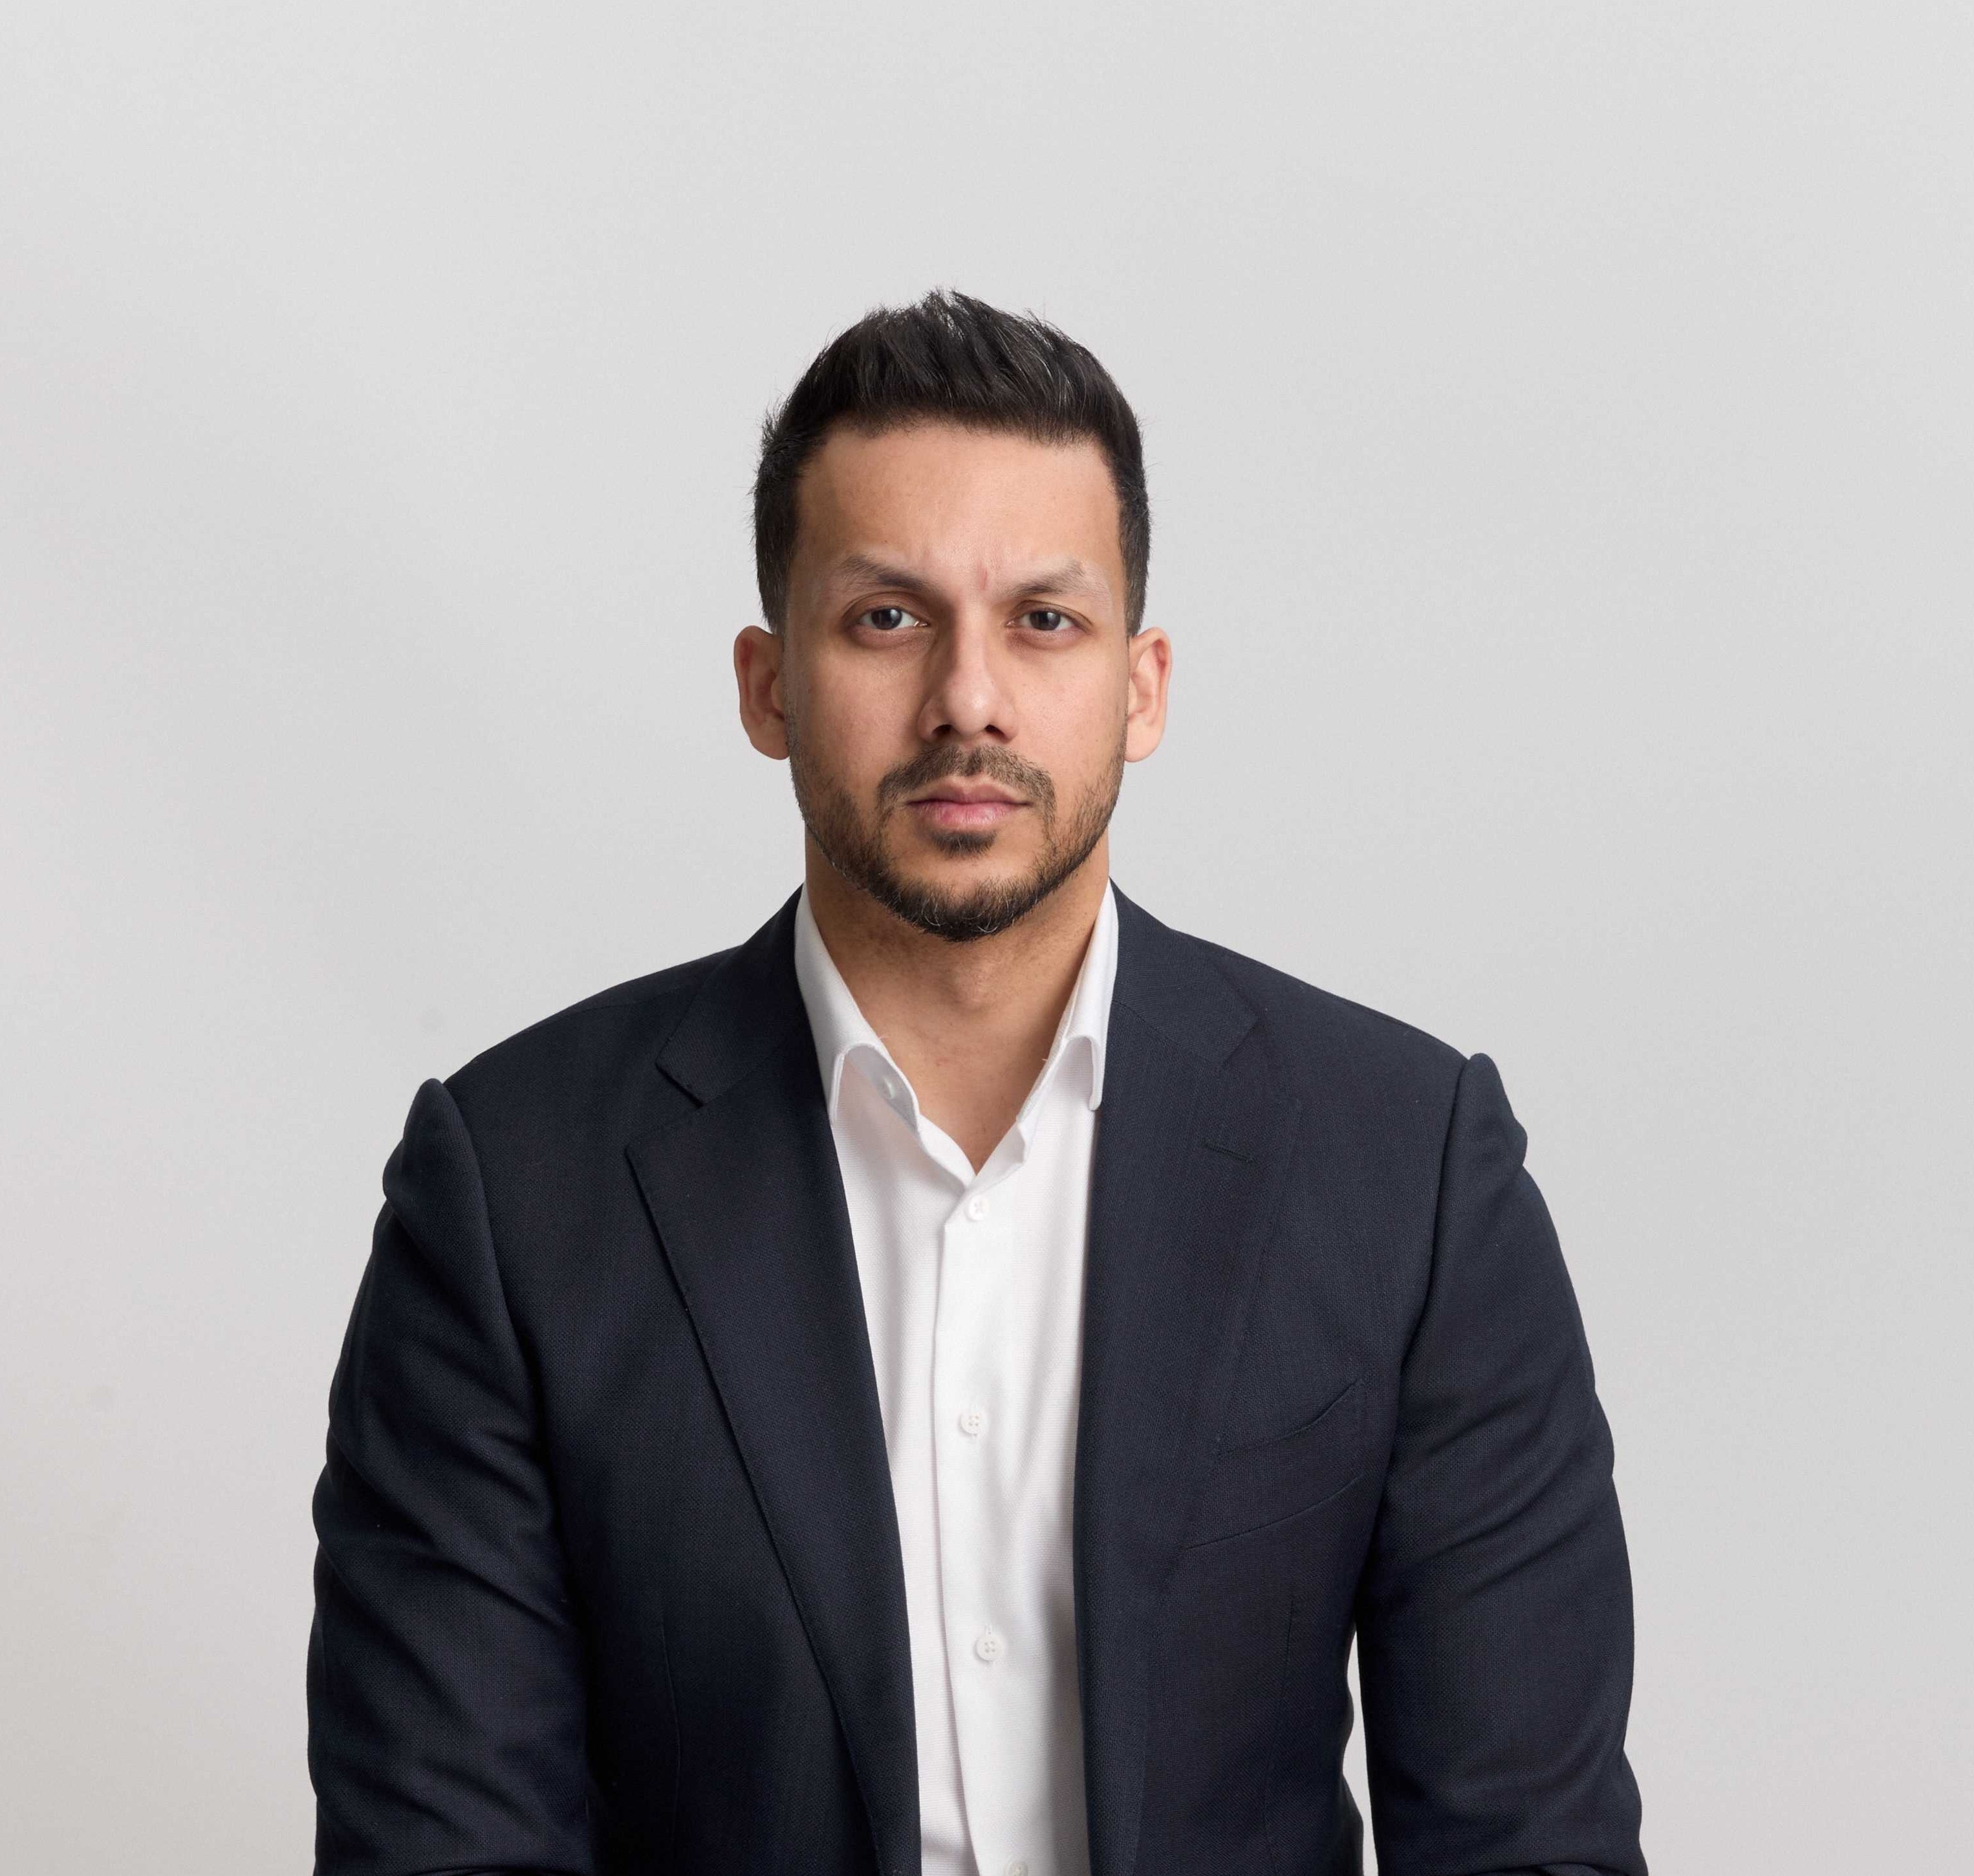 Saad Hassan - Founder and Chief Executive Officer of Nvestiv - President of Hassan Family Office, Toronto